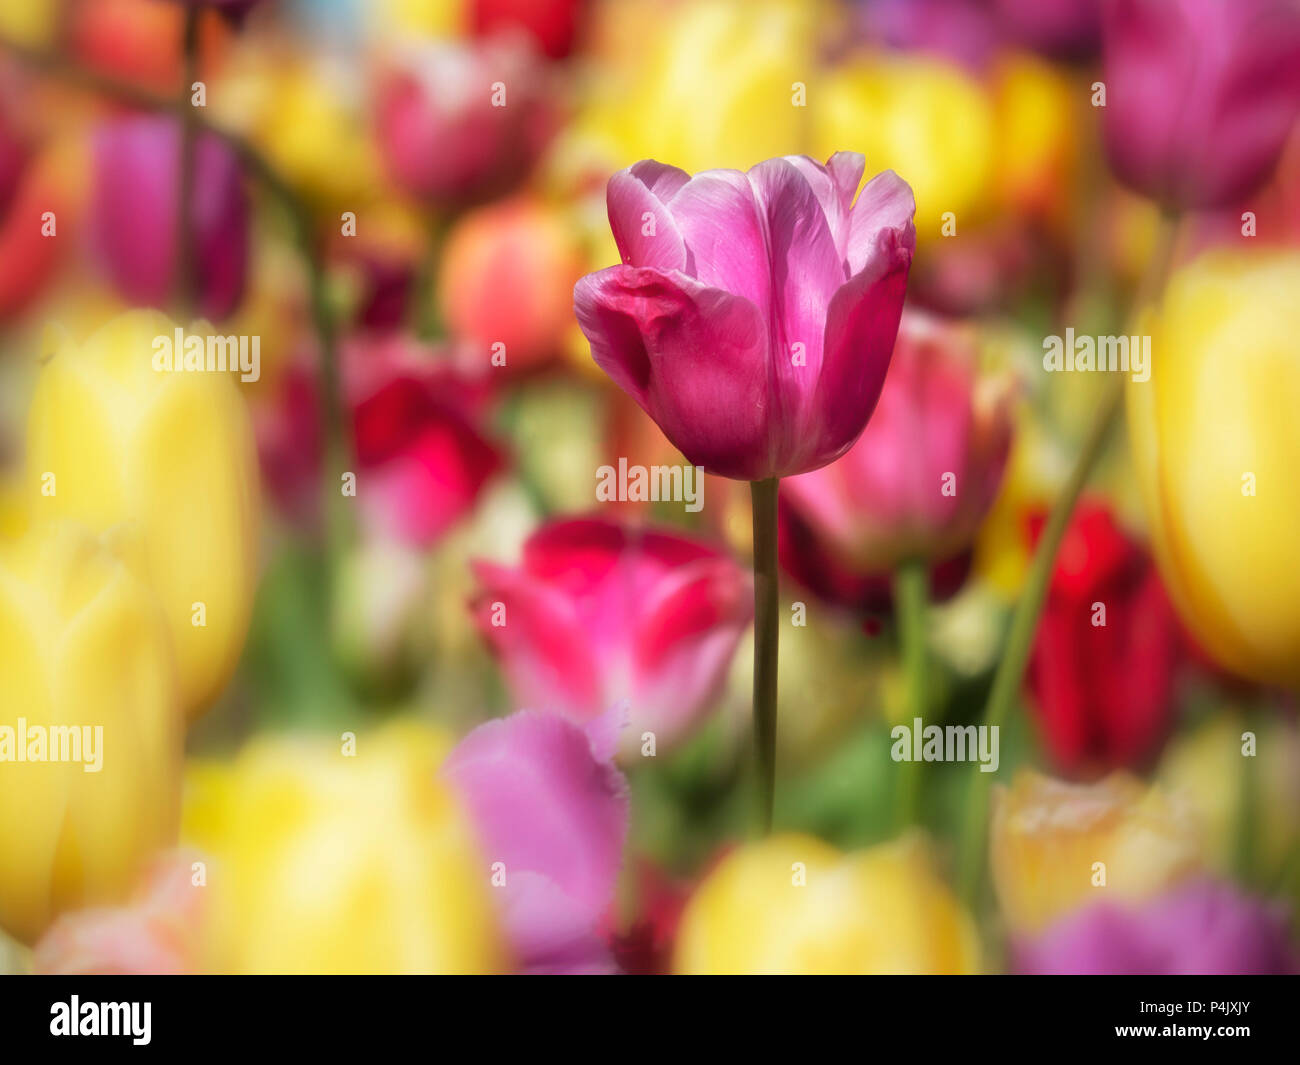 BACKGROUND - Multicolour Tulip Display in spring for use as a Background Stock Photo